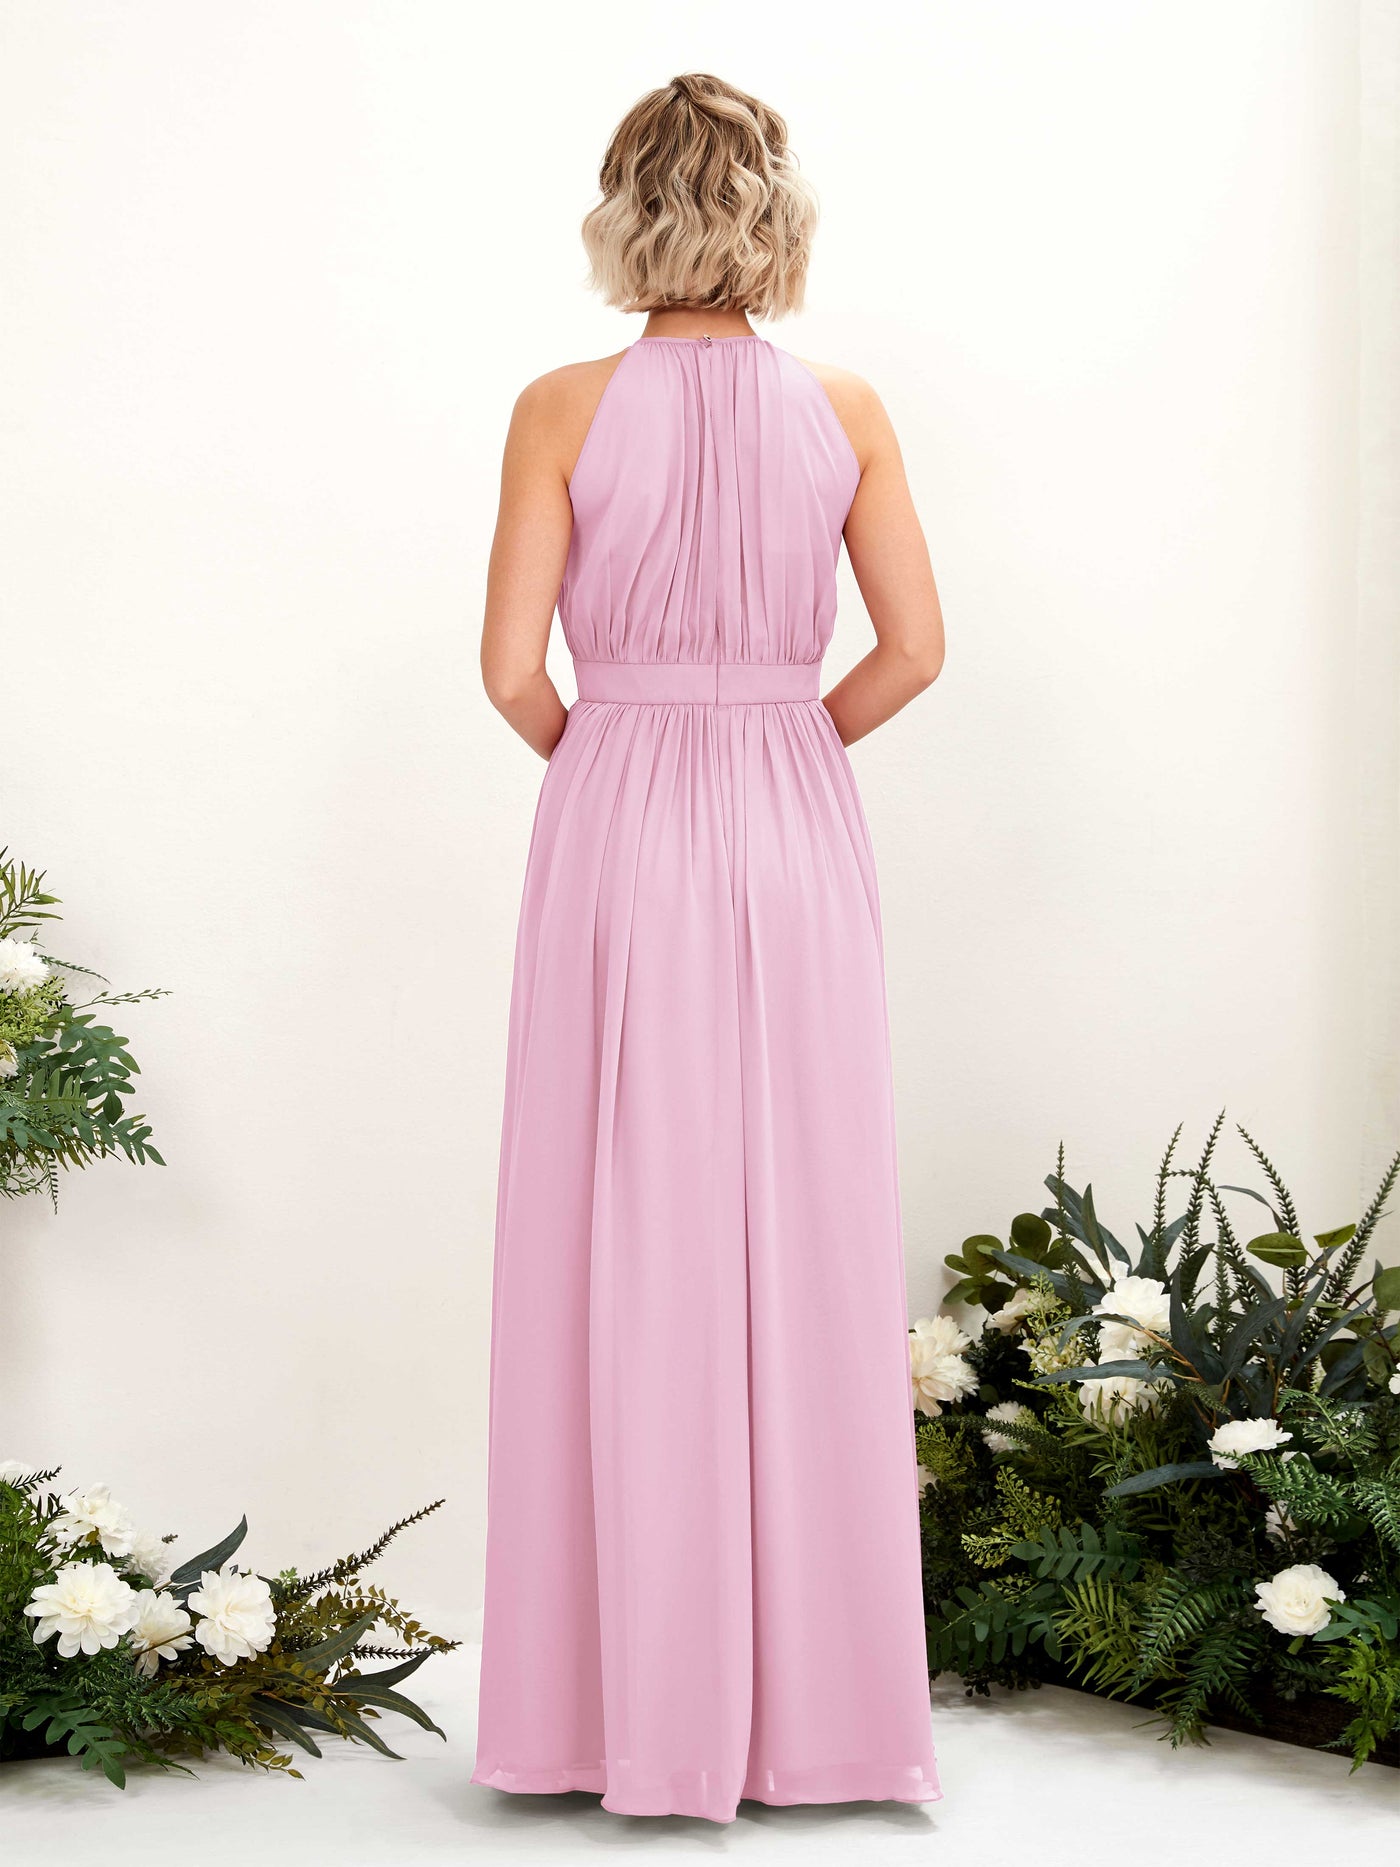 Candy Pink Bridesmaid Dresses Bridesmaid Dress A-line Chiffon Halter Full Length Sleeveless Wedding Party Dress (81223139)#color_candy-pink